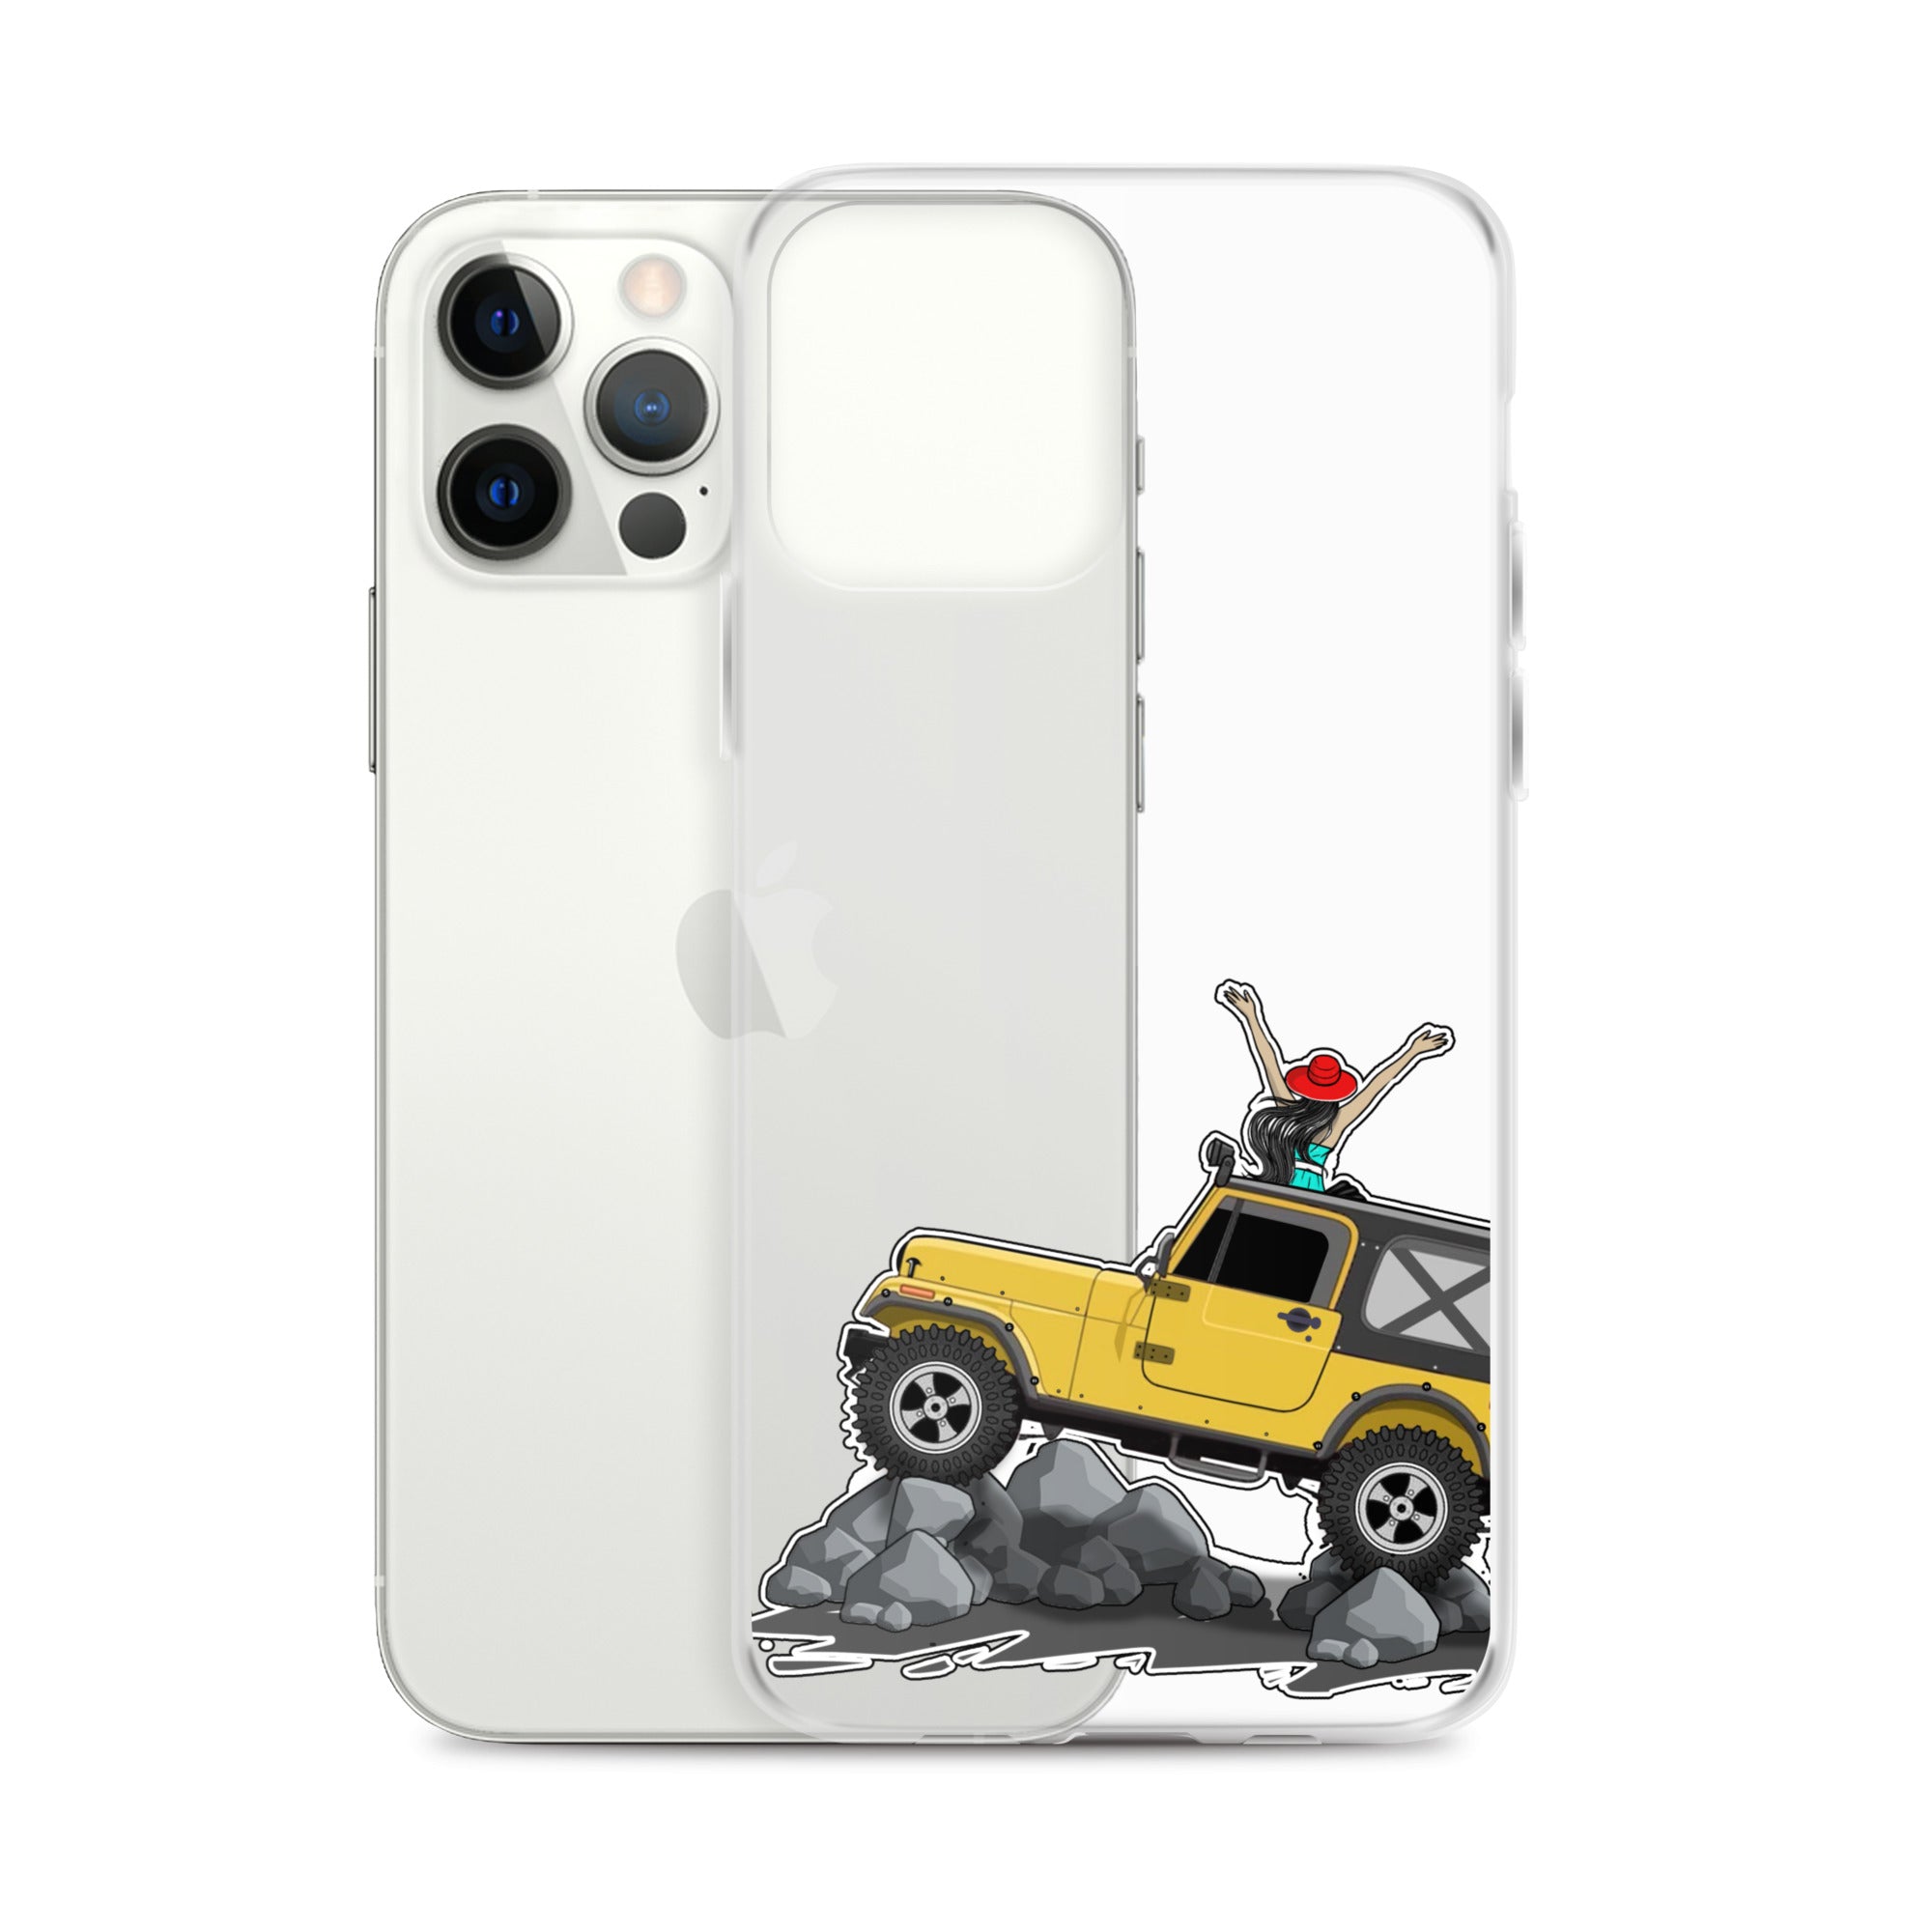 Jeep on the Rocks iPhone Case